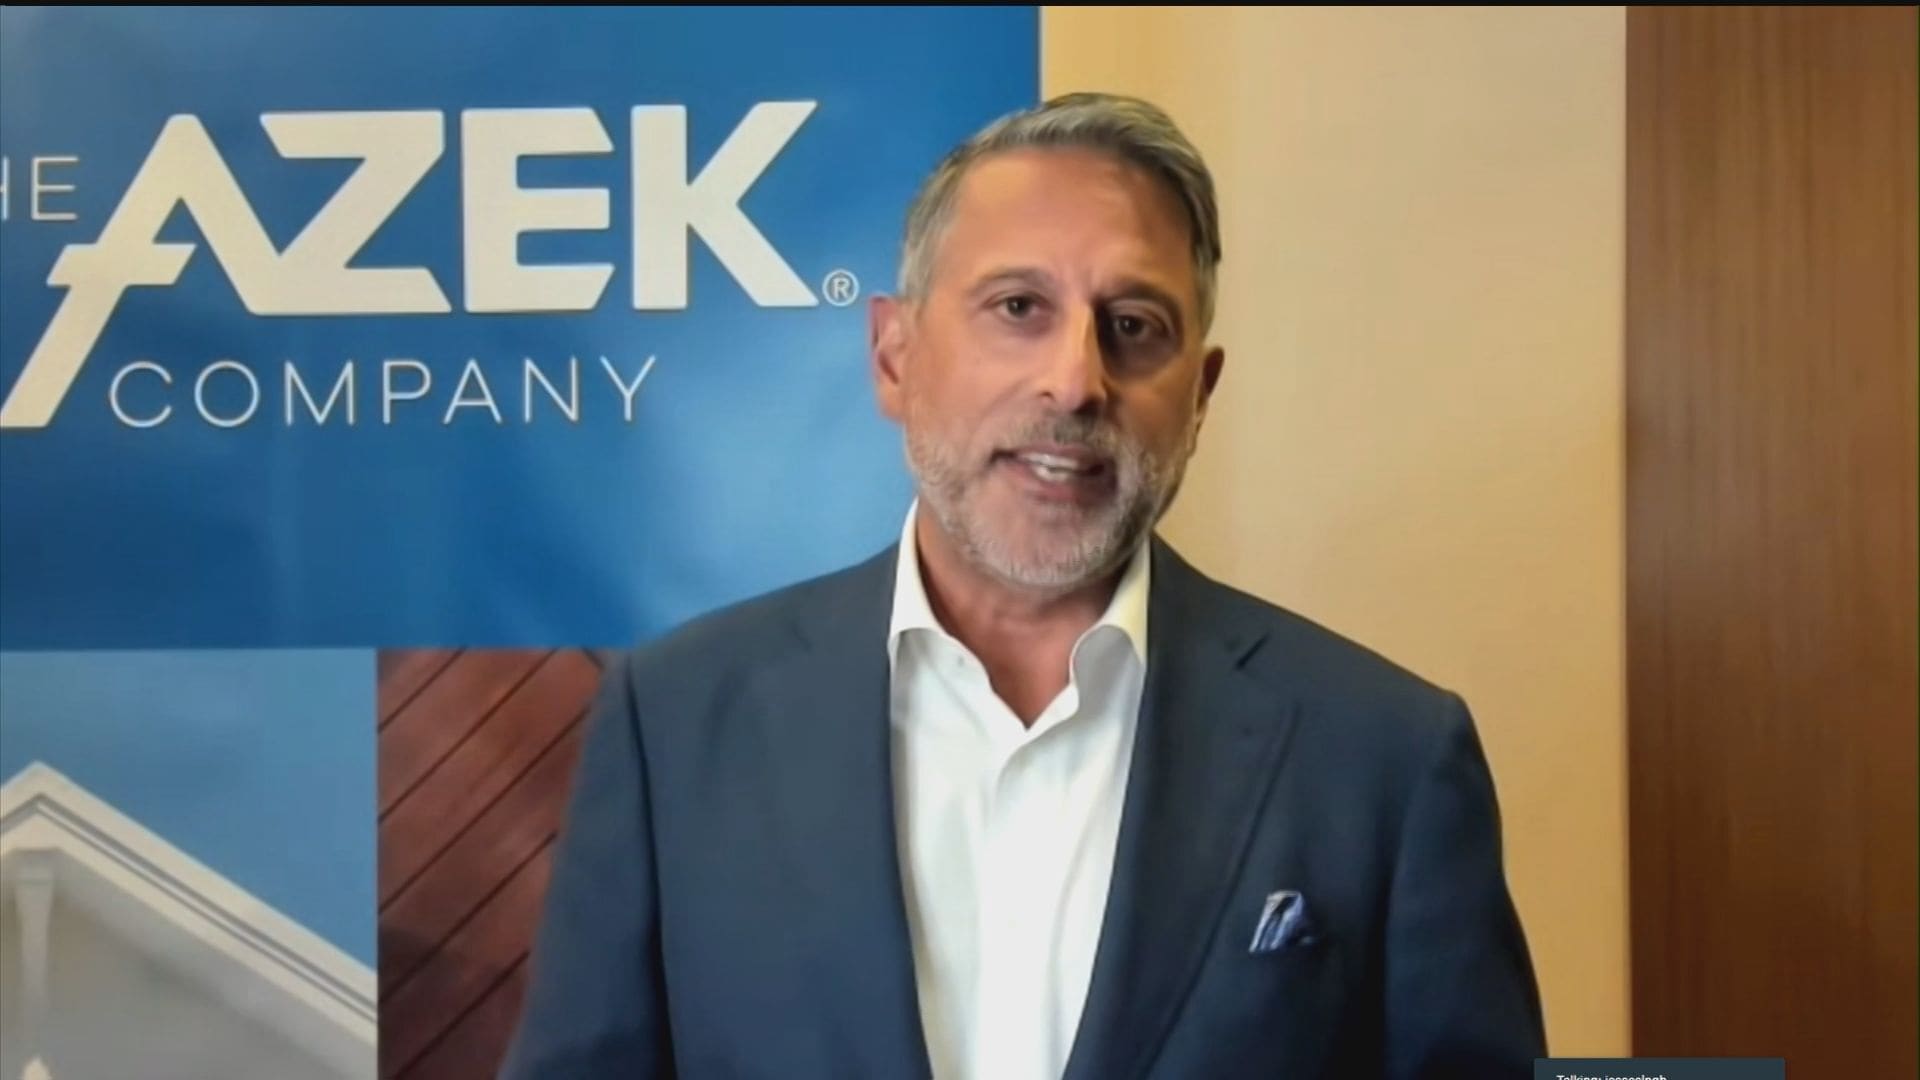 Azek CEO expects raw material costs will ‘come back down,’ helping fuel profit growth